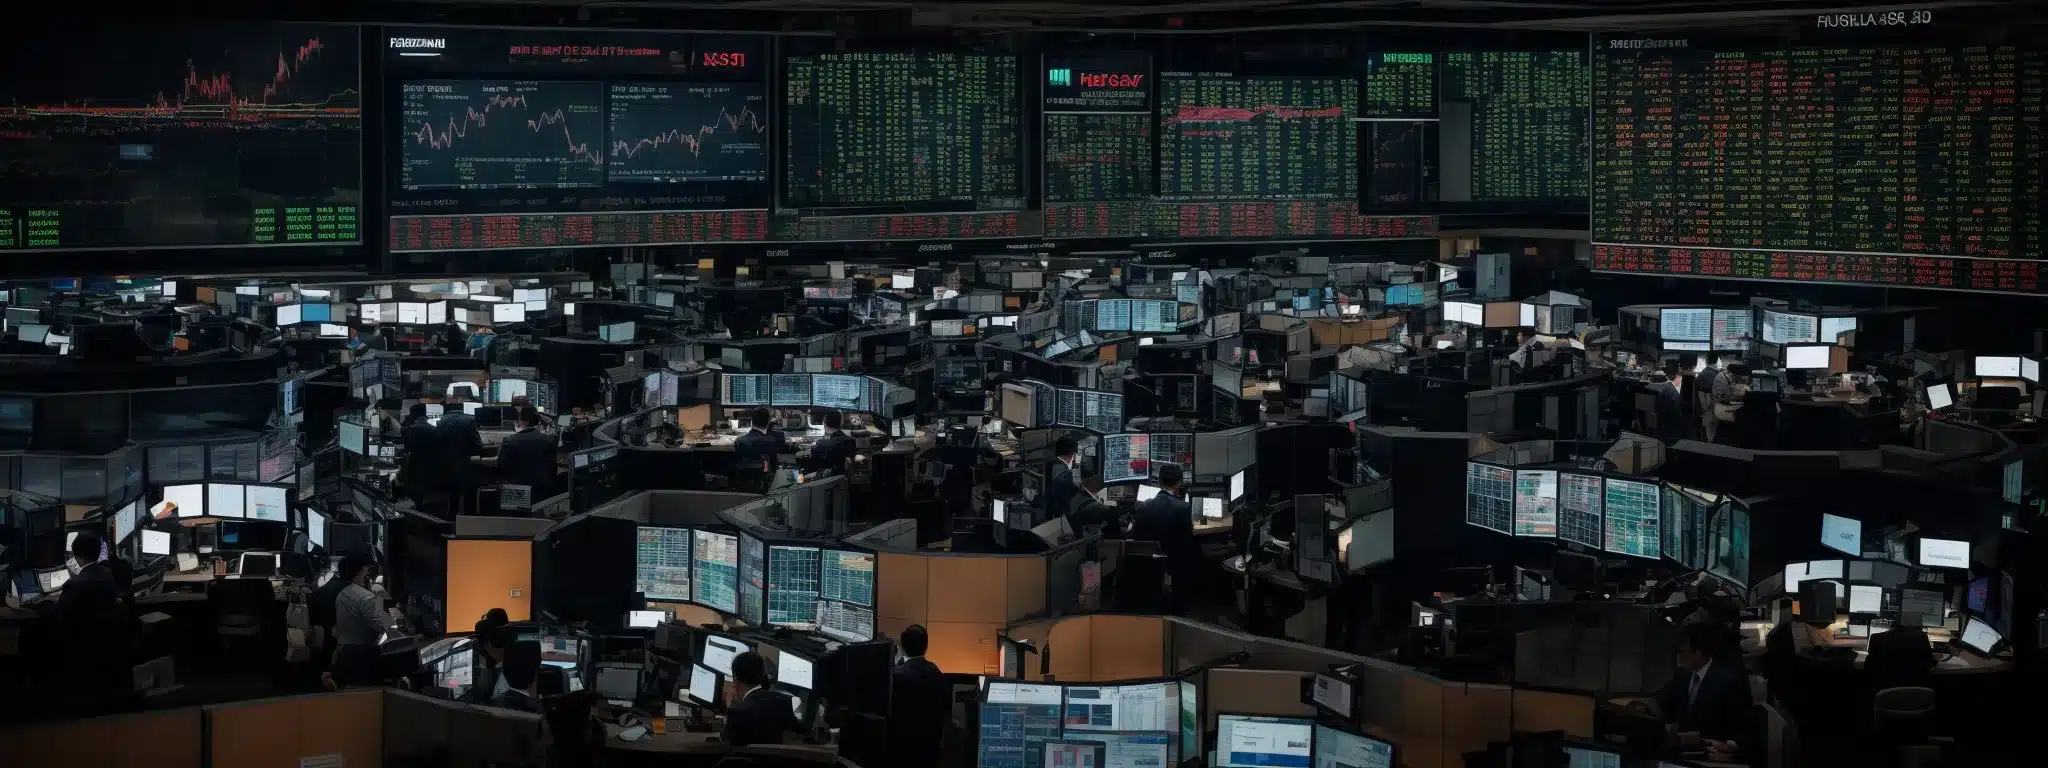 A Bustling Stock Market Trading Floor With Screens Displaying Fluctuating Data Graphs.